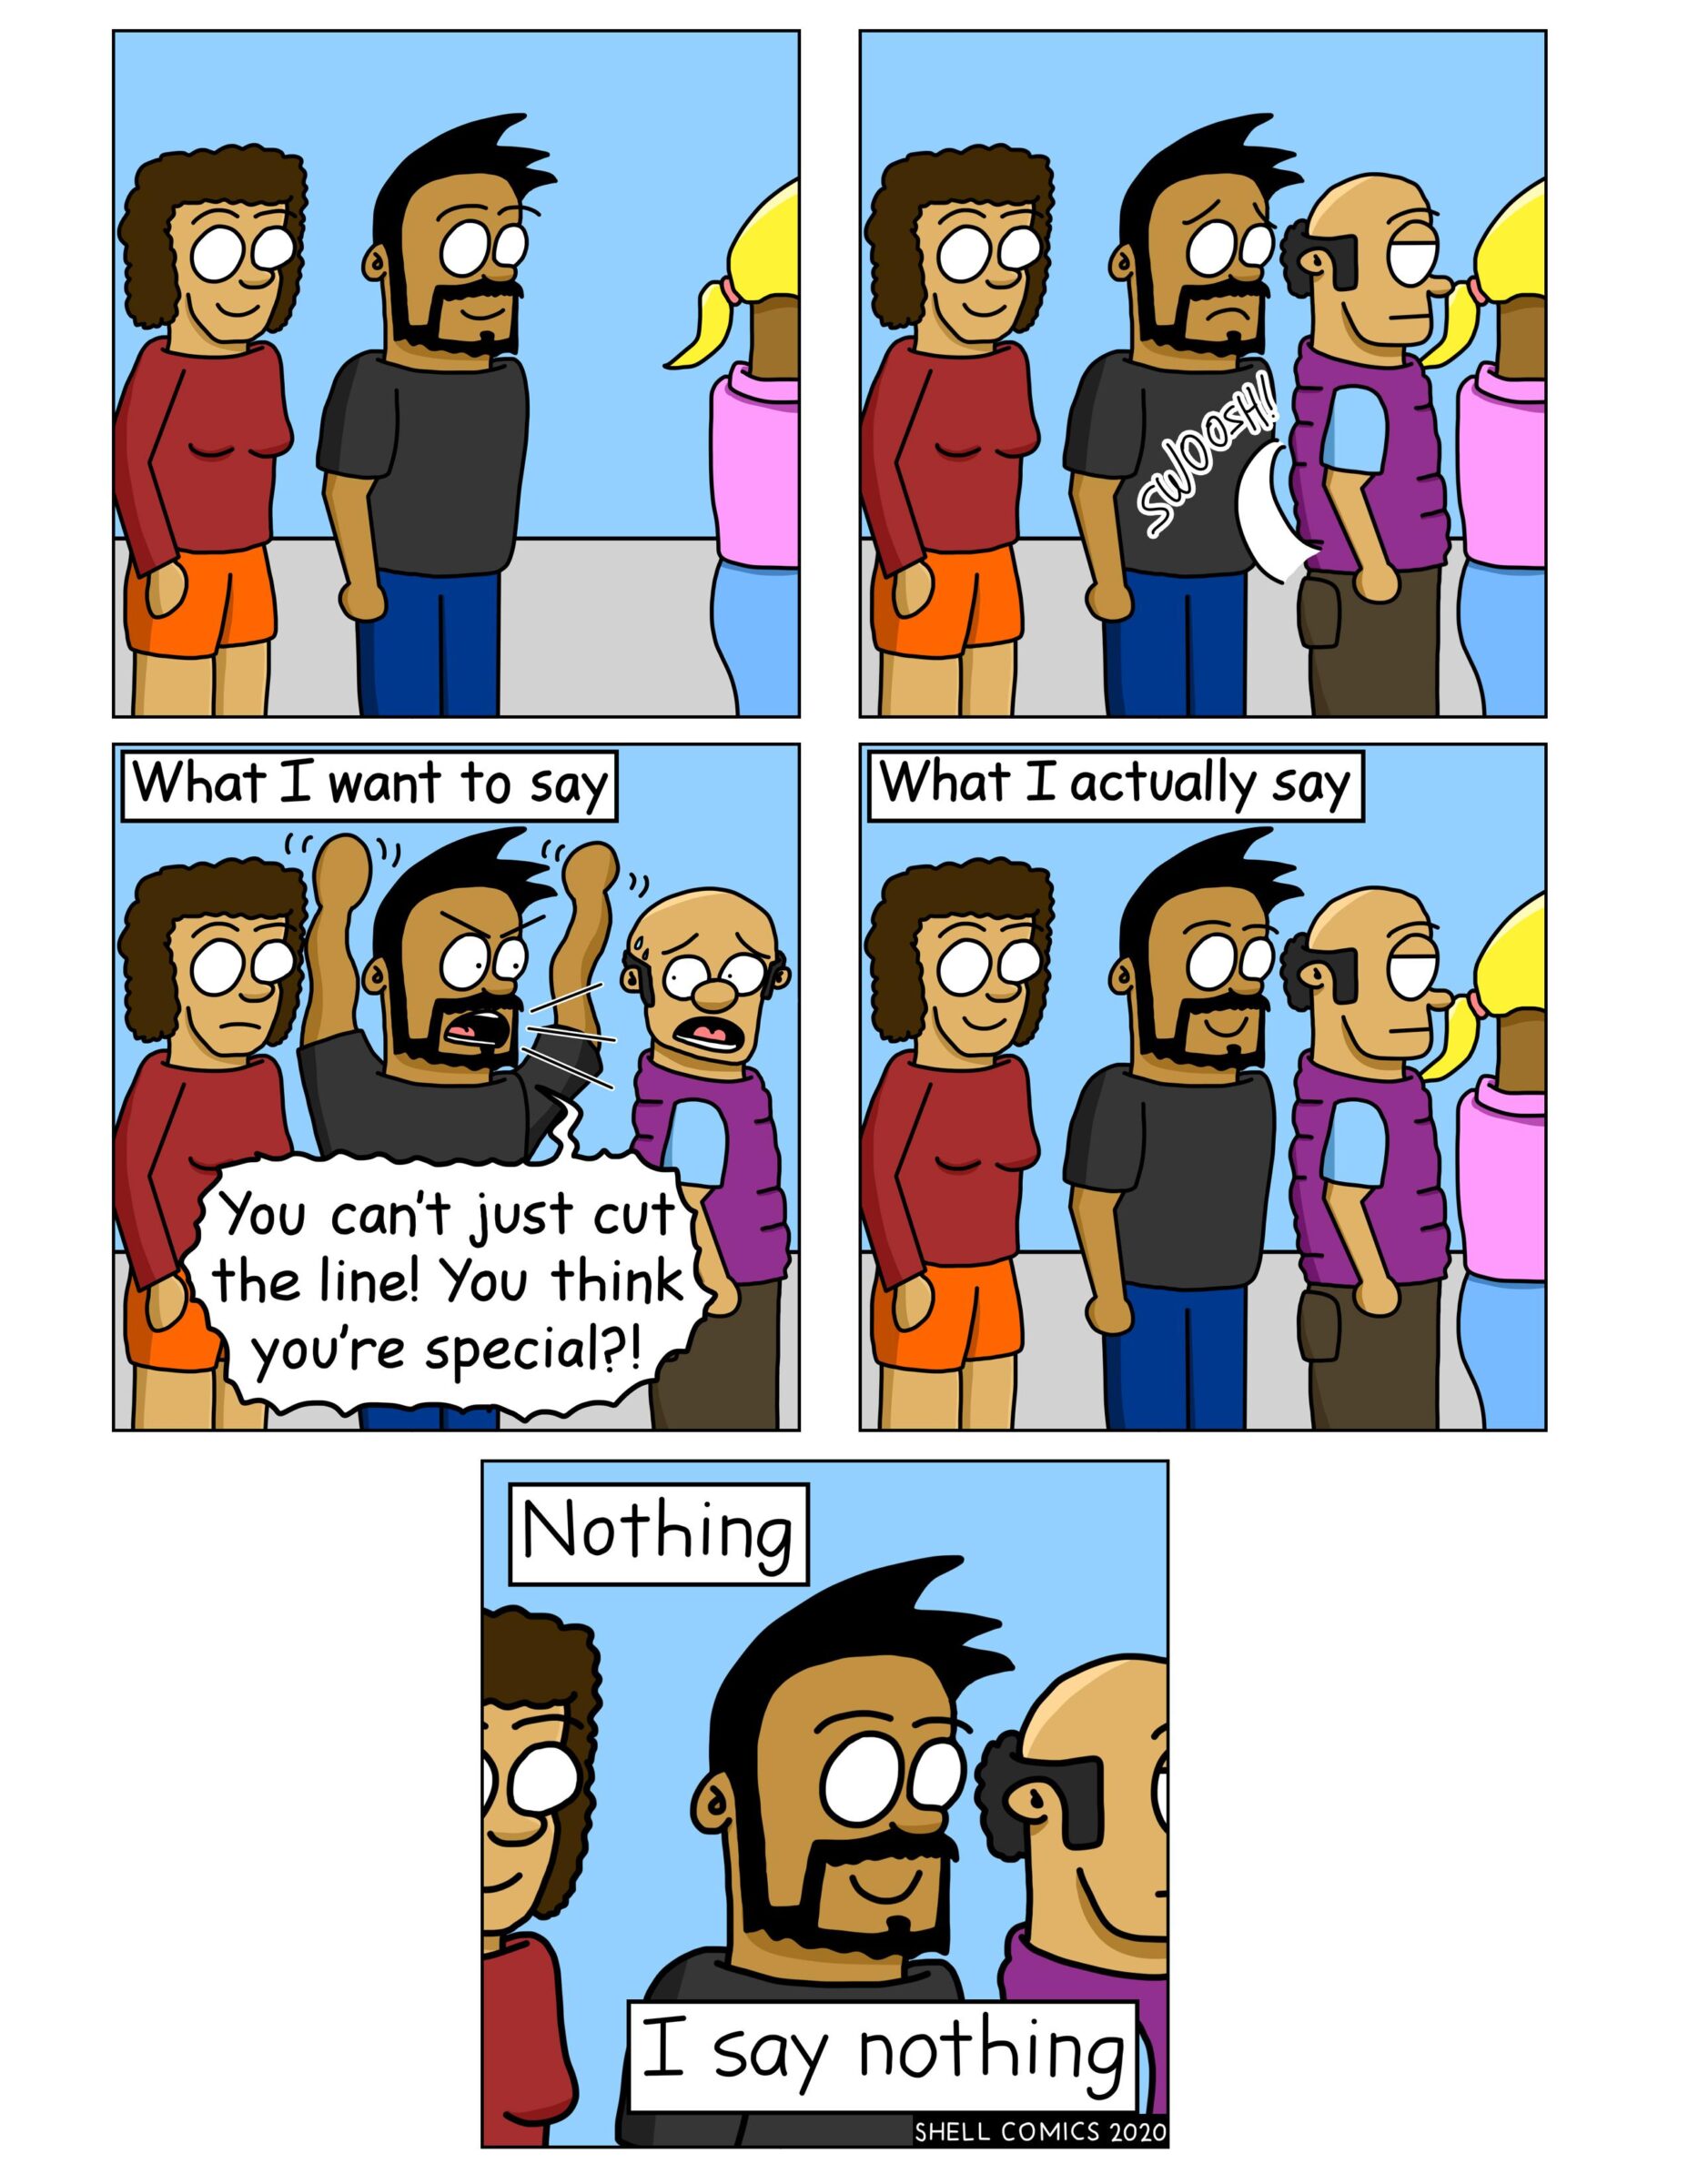  this is fine(from shellcomics),  Comics  this is fine(from shellcomics),  text: 00 Oe You can't just cut the line! You think you're special?! Nothing I say nothing SHELL COMICS 2020 